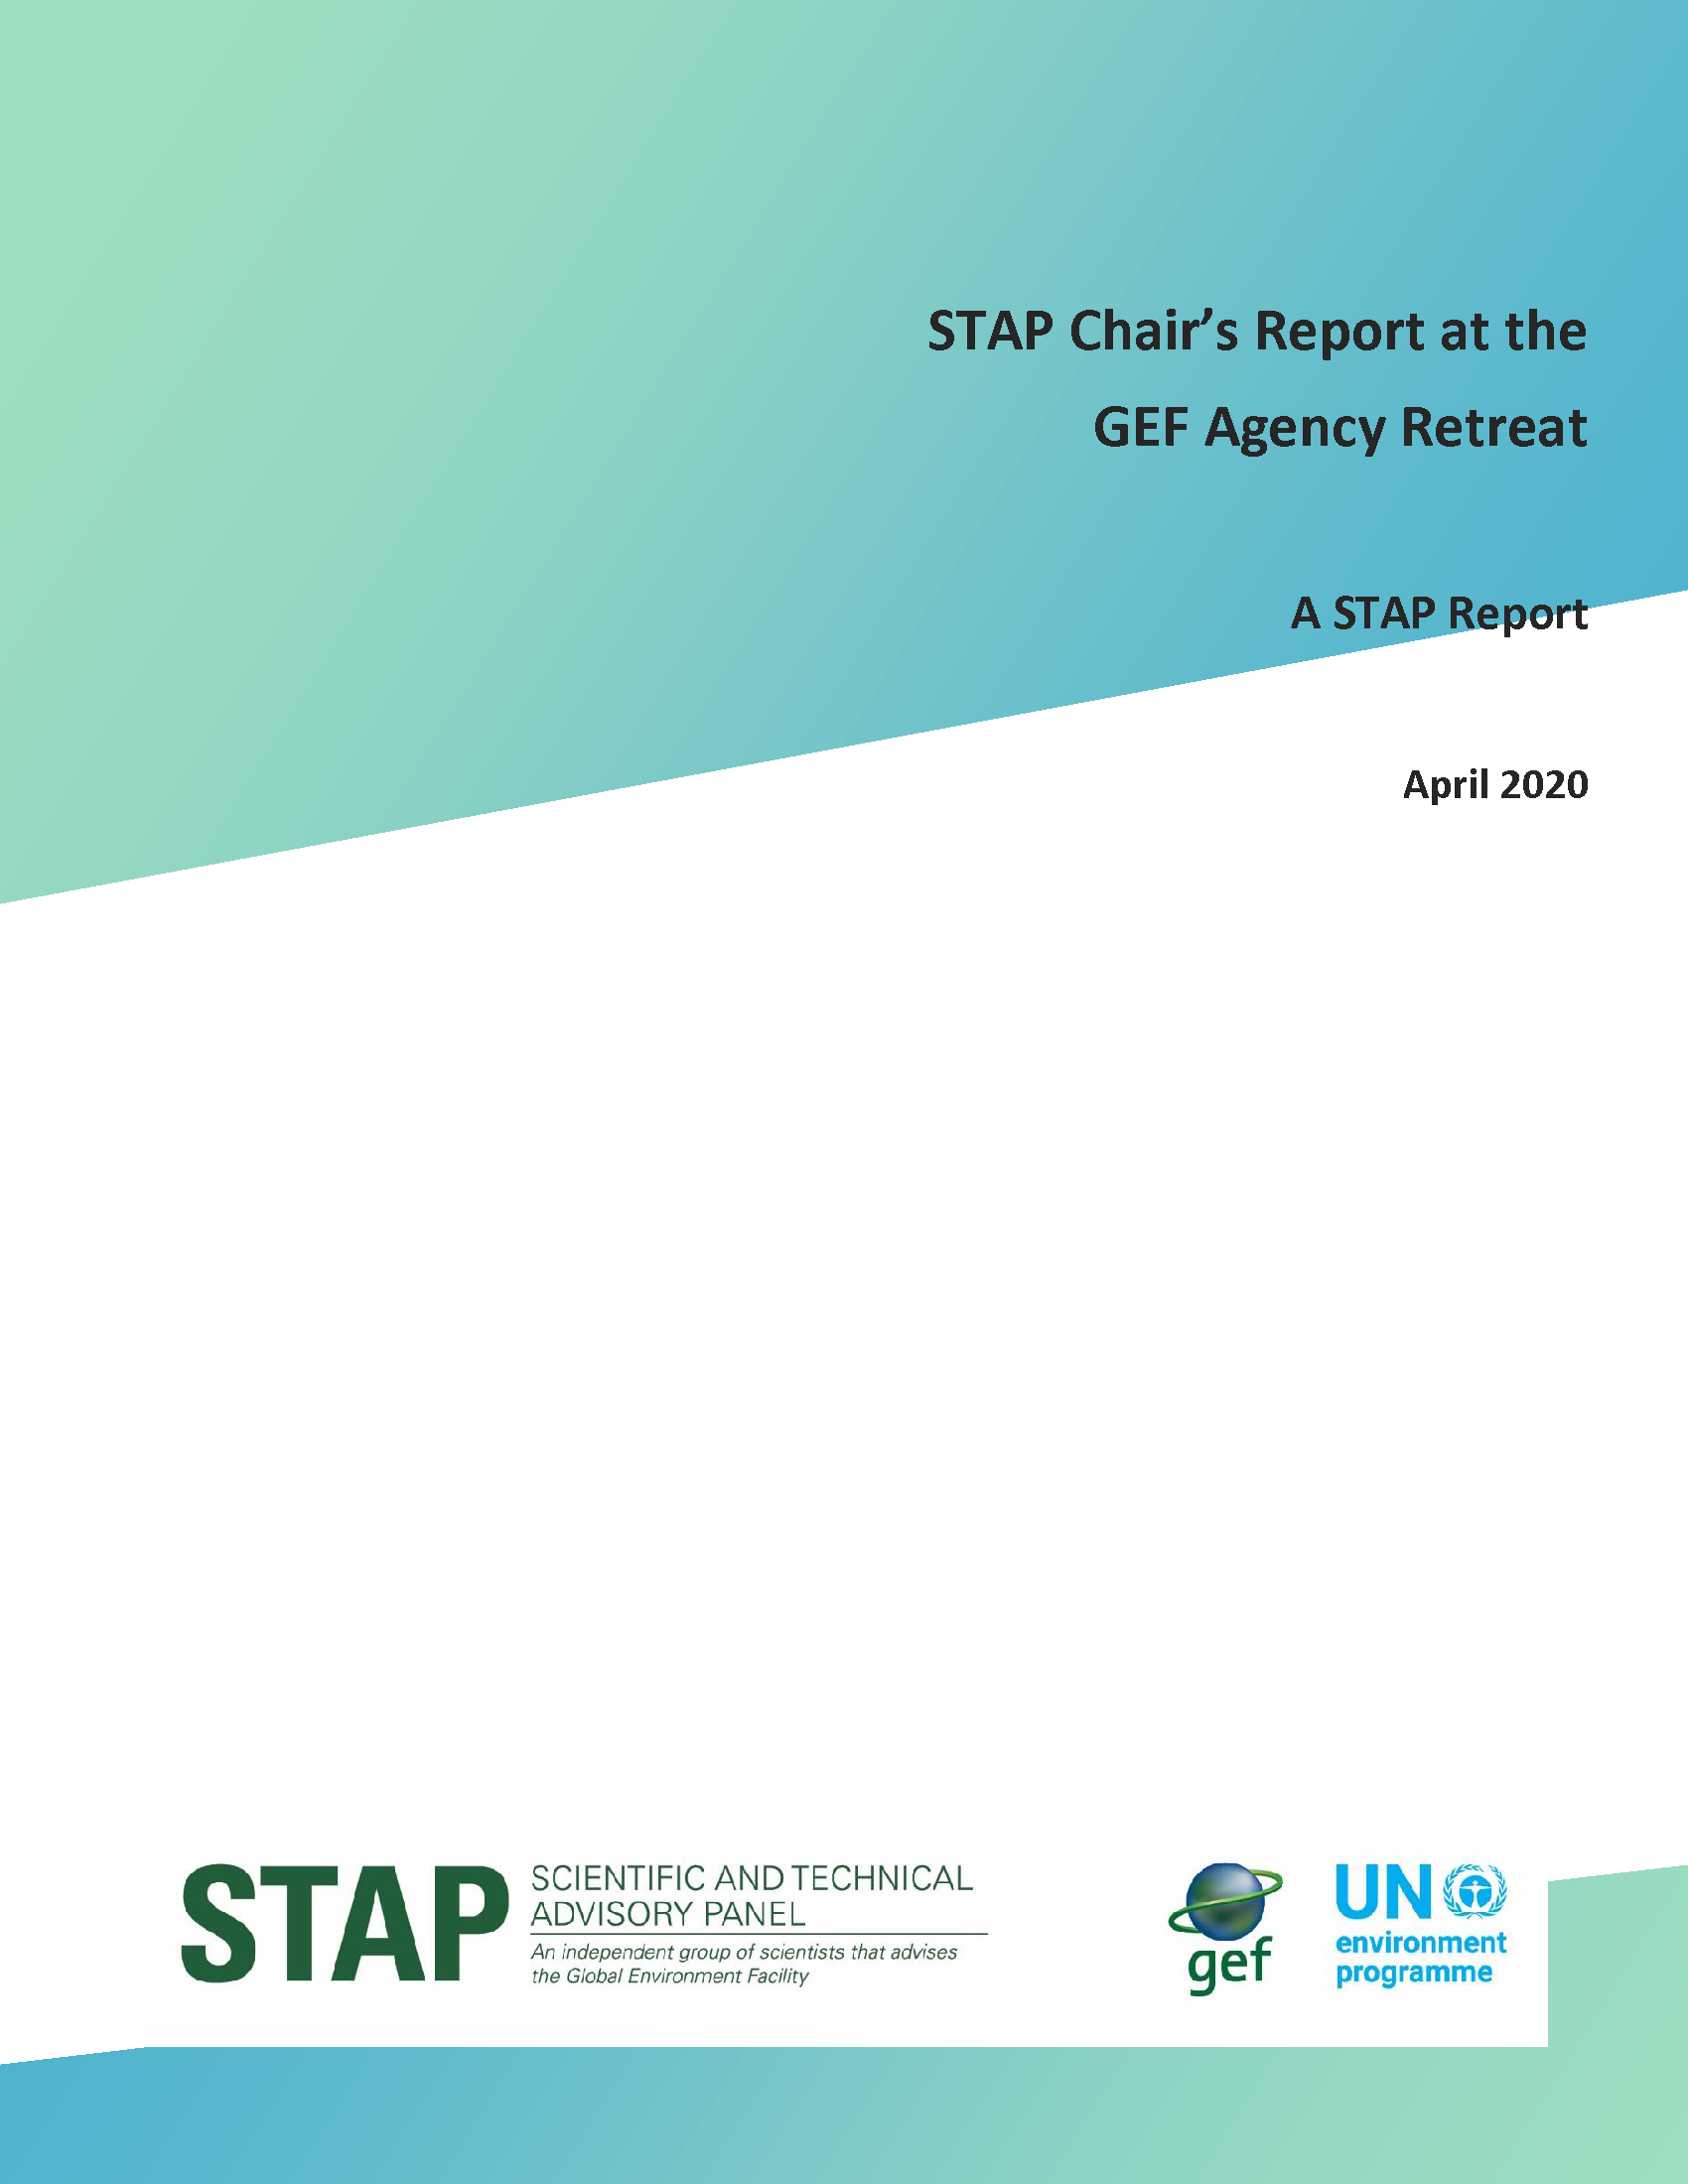 STAP Chair's Report at the GEF Agency Retreat, 1 April 2020